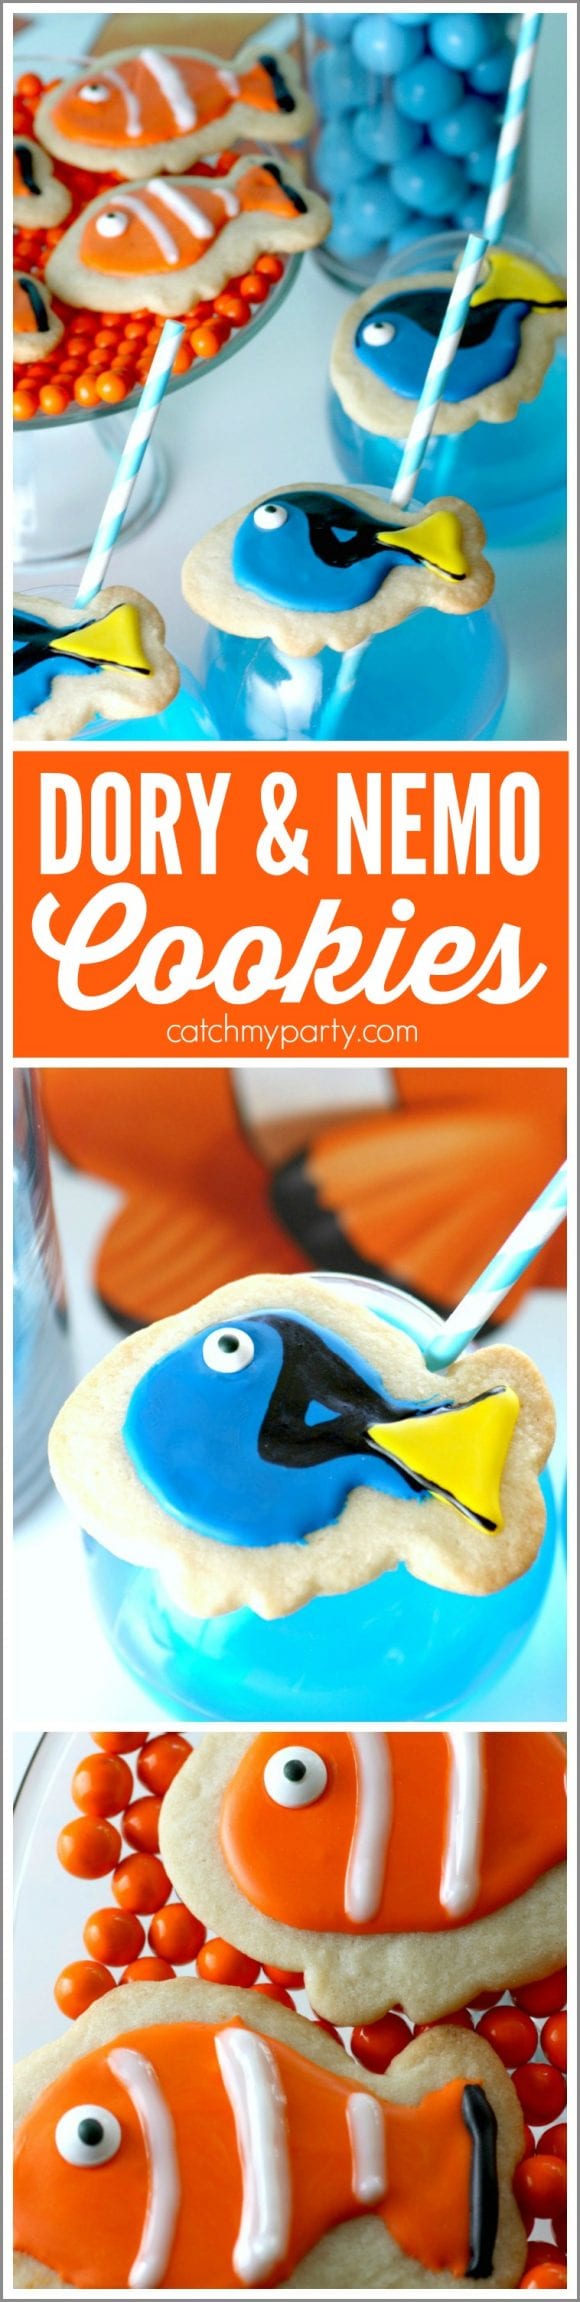 Finding Dory & Finding Nemo Cookies | CatchMyParty.com